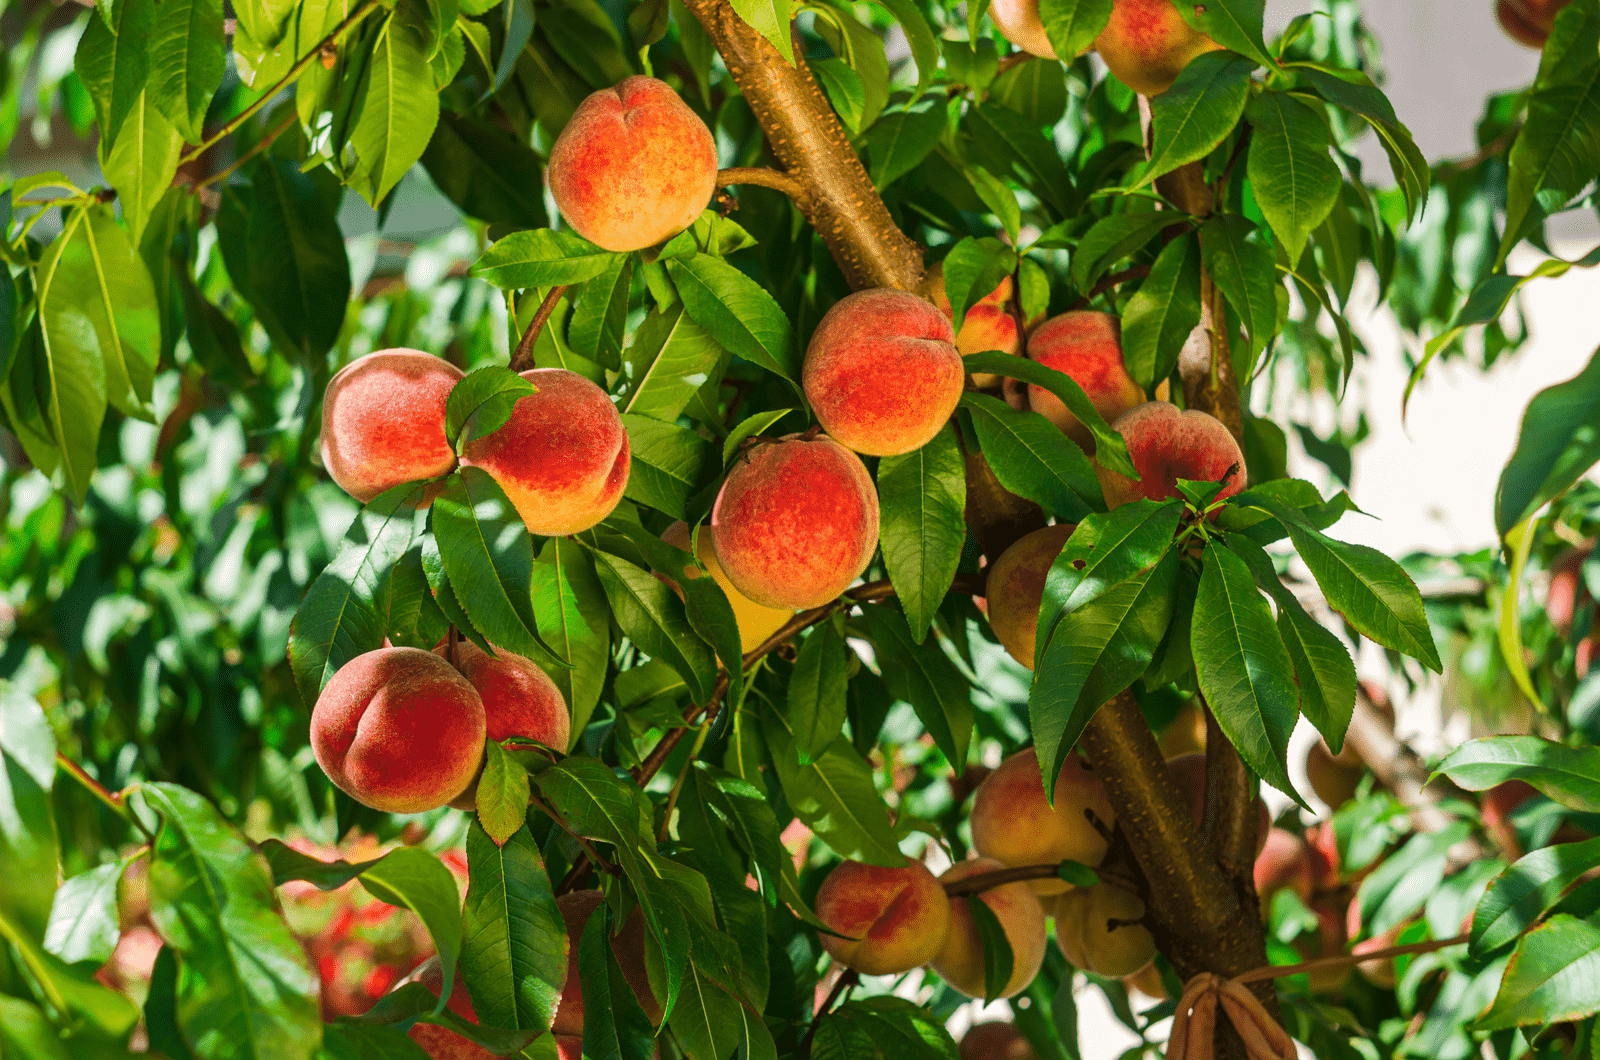 Ripe peaches on the tree with natural backlight